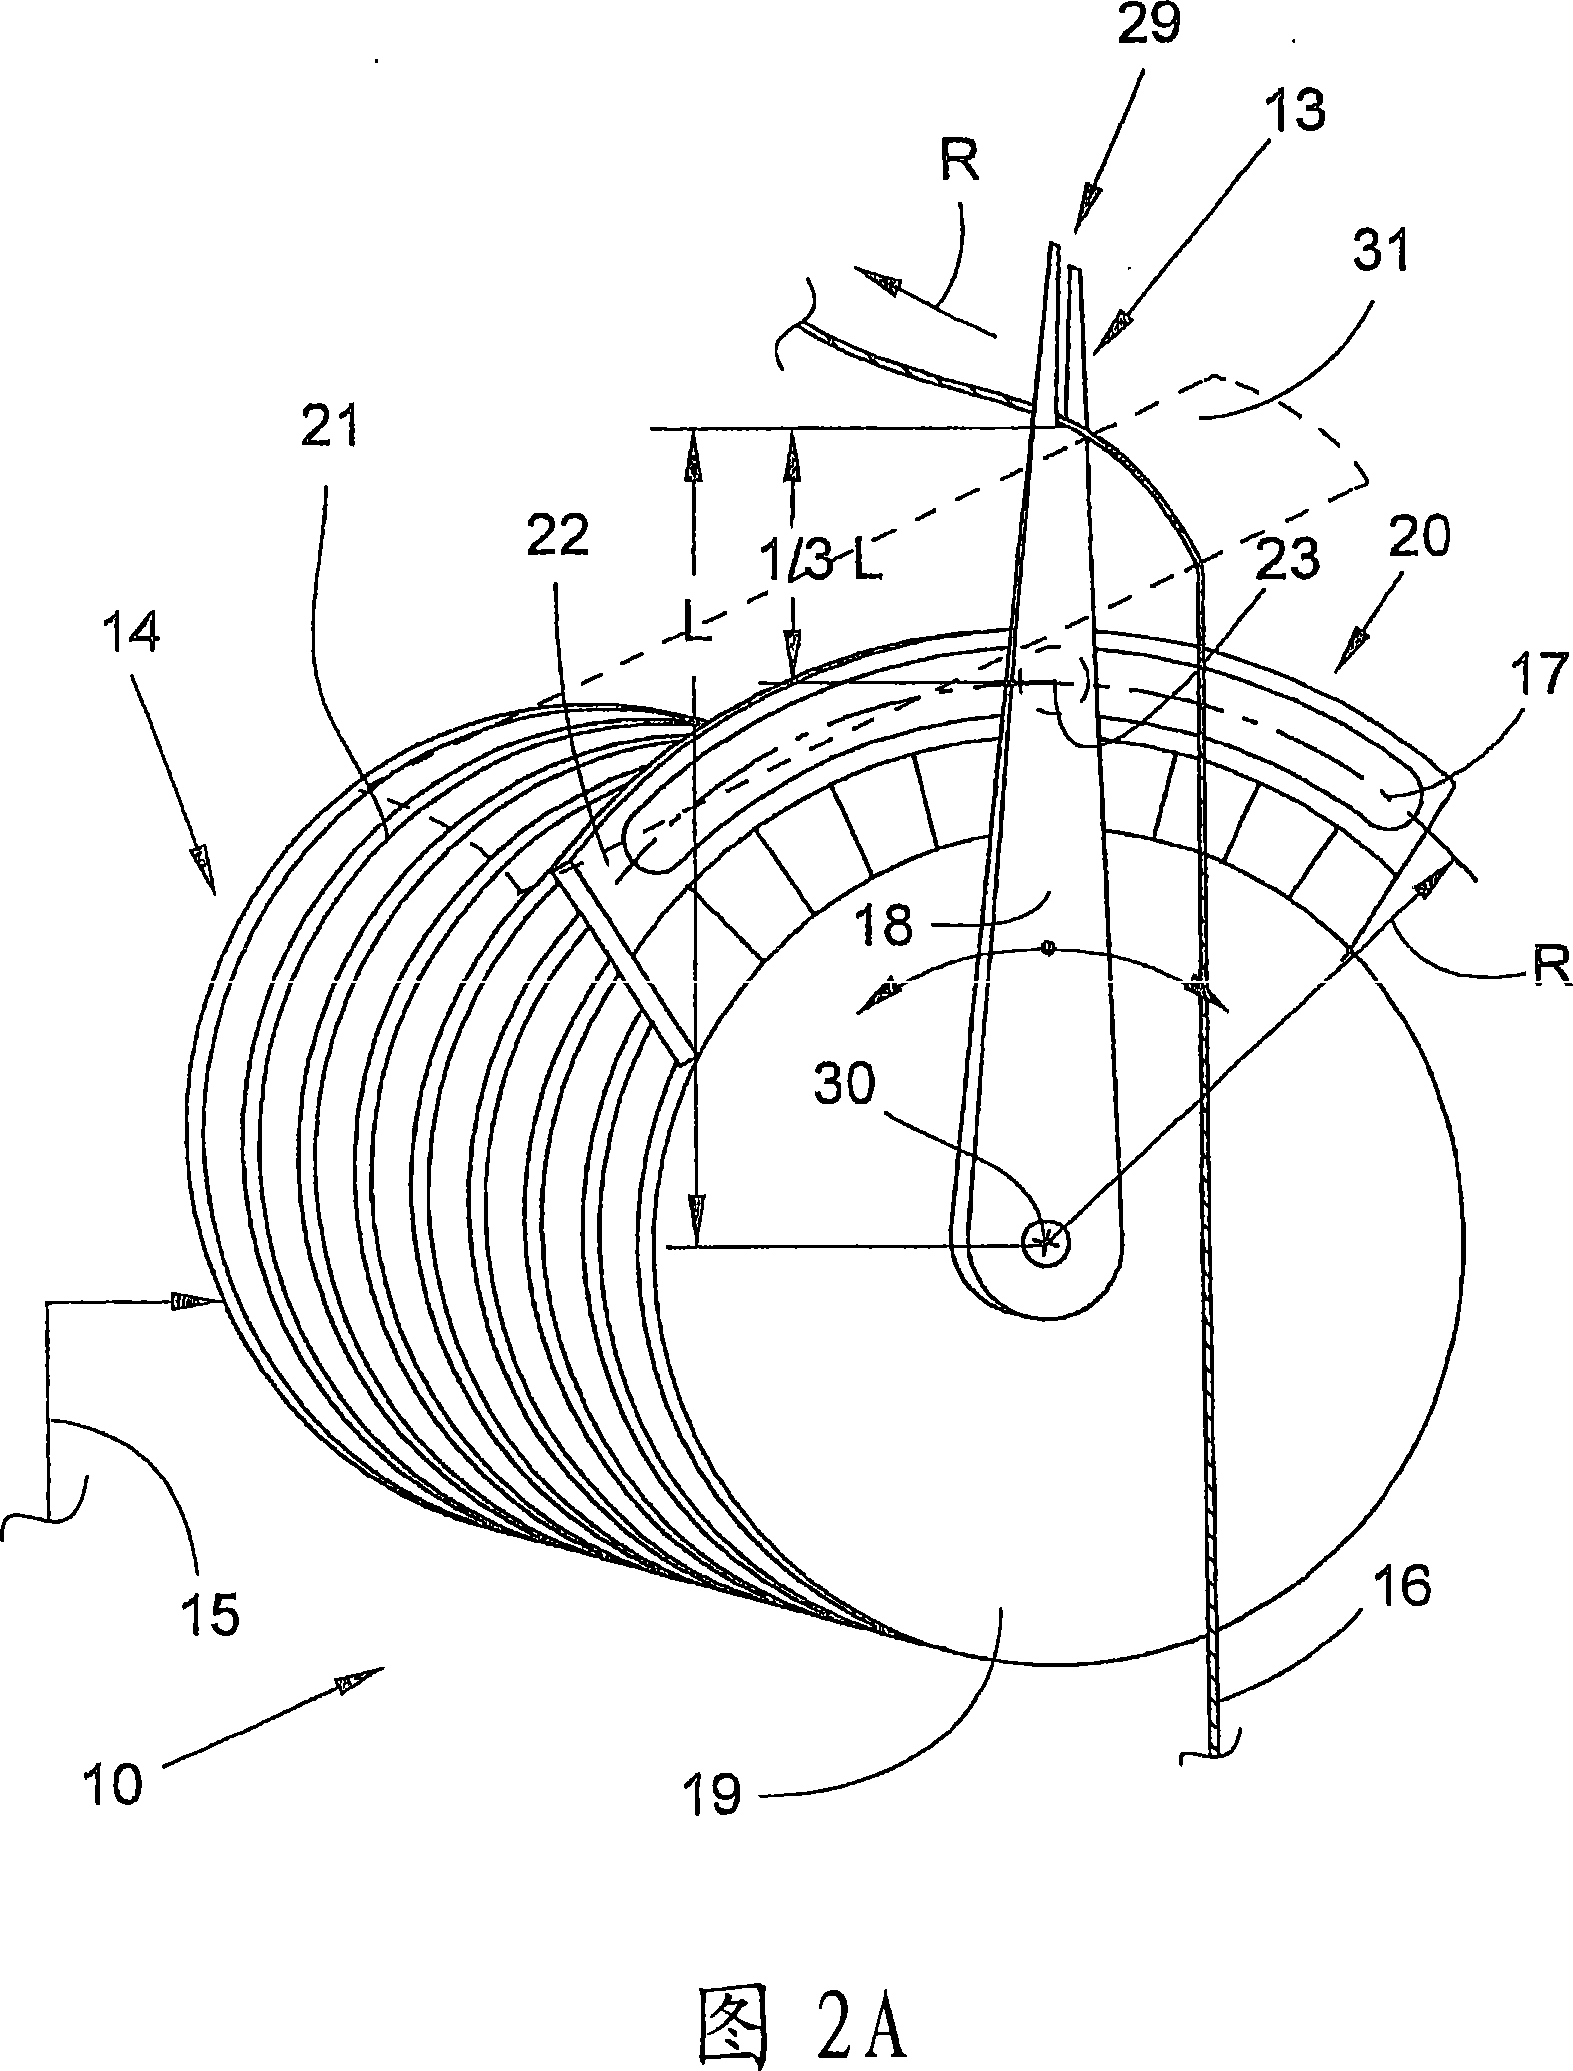 Thread traversing device for a winding device in a textile machine producing crosswound bobbins